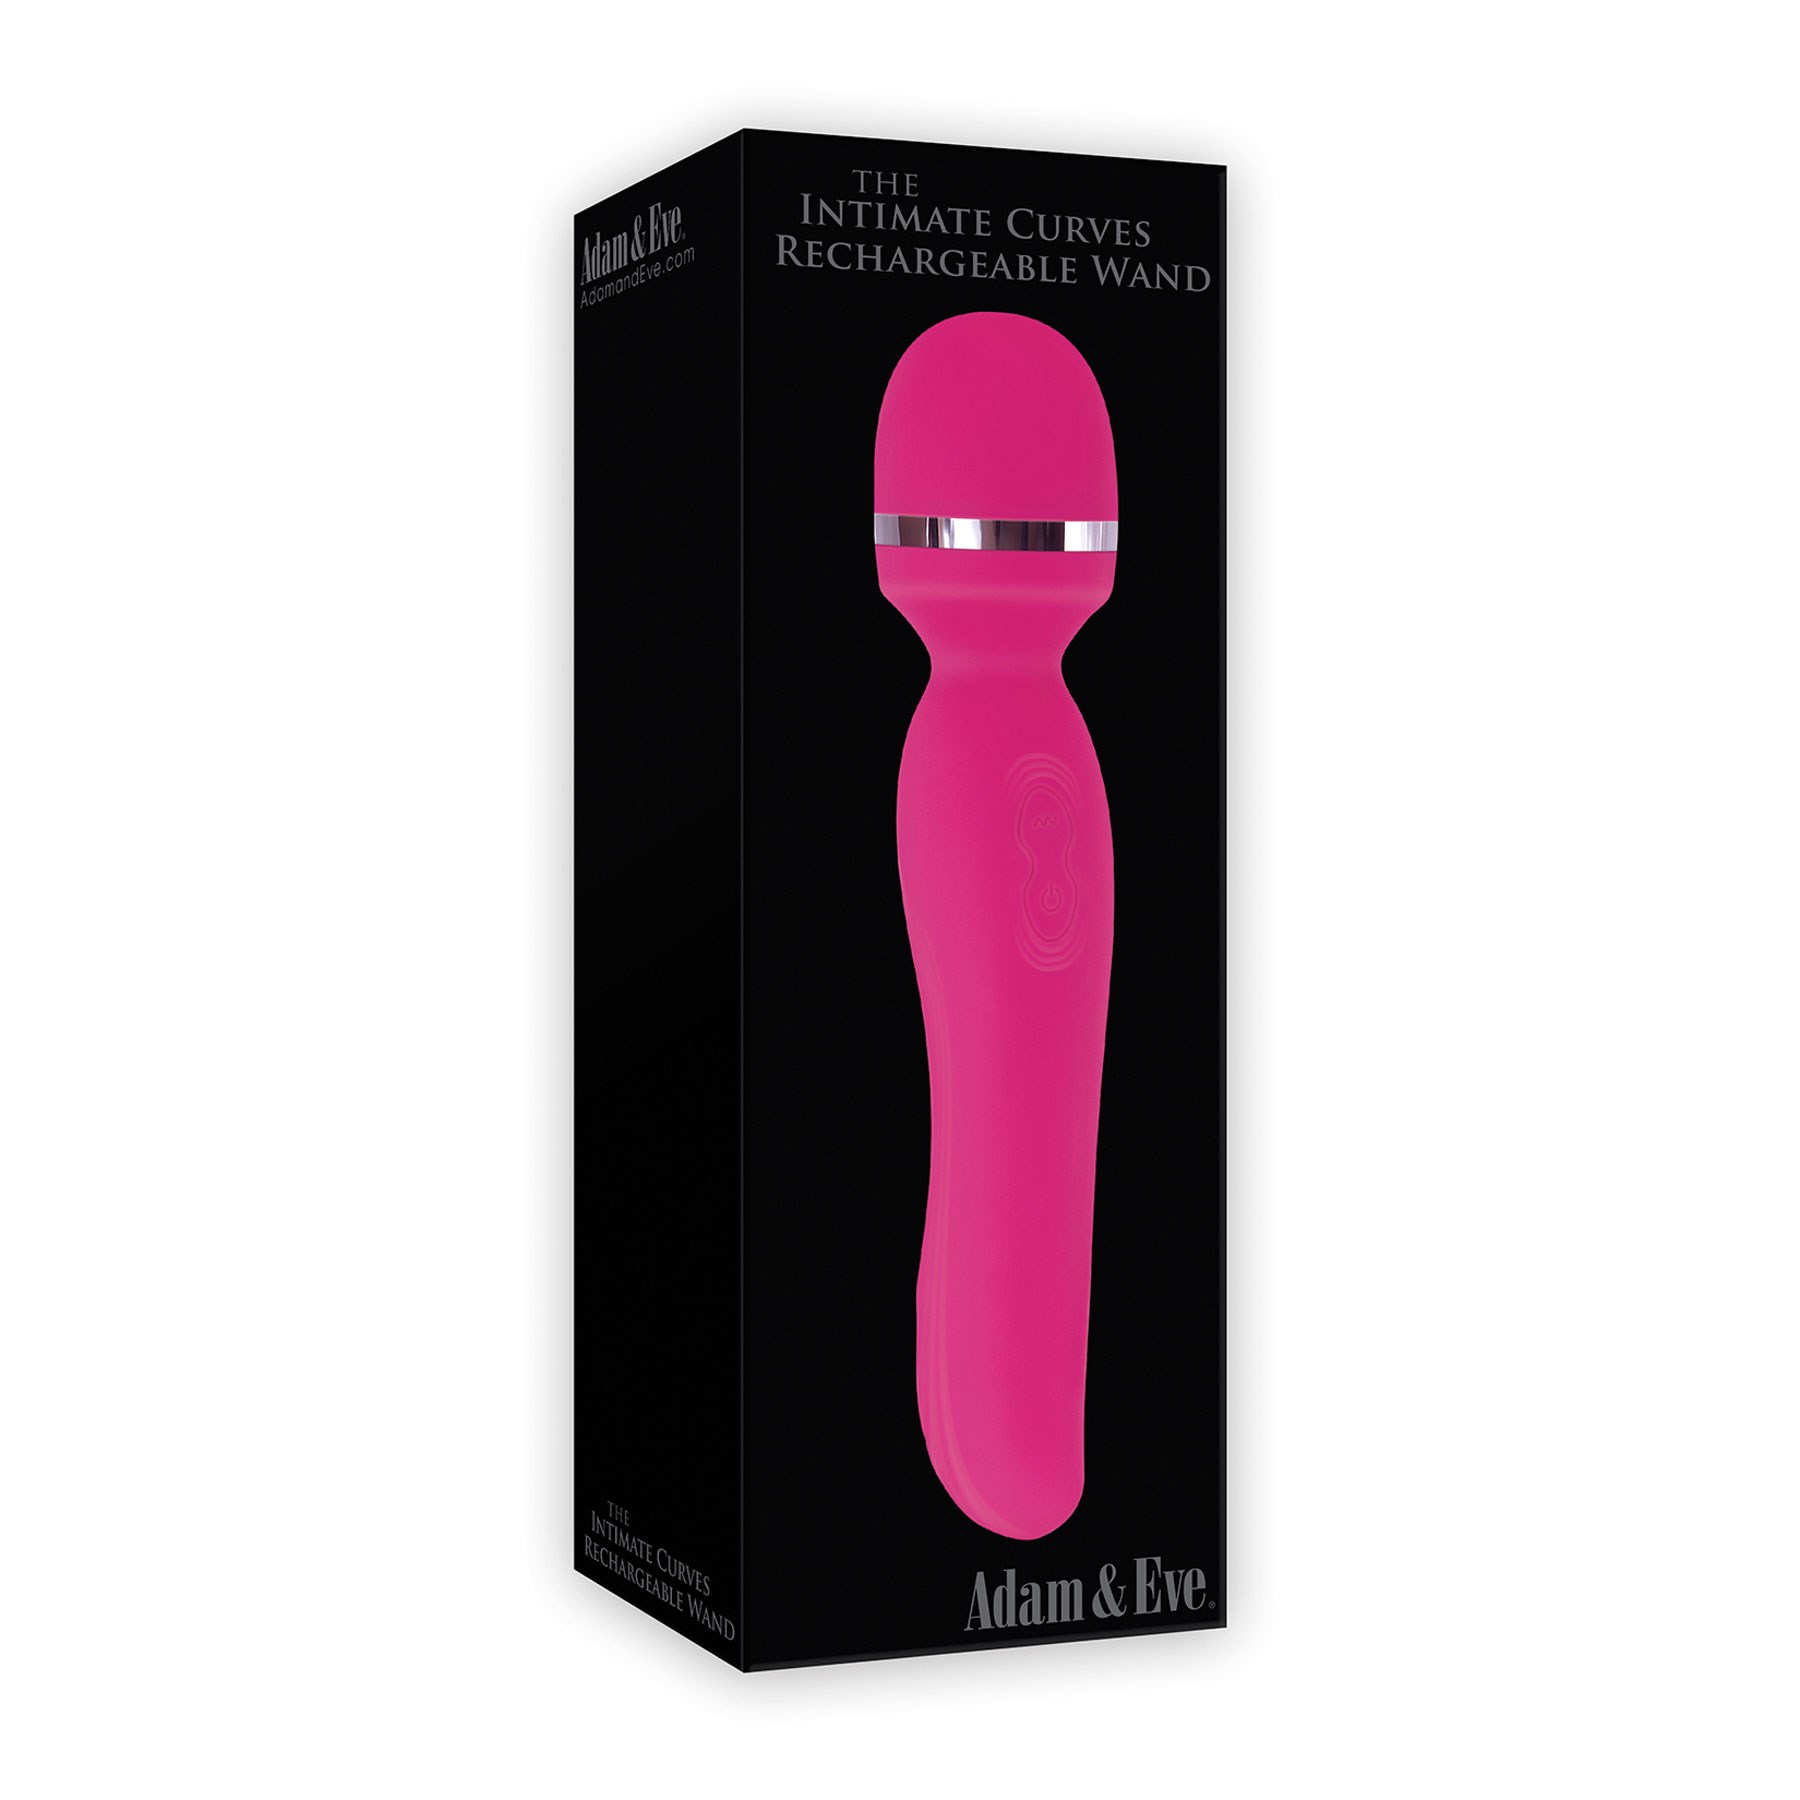 Adam & Eve Intimate Curves Rechargeable Wand box